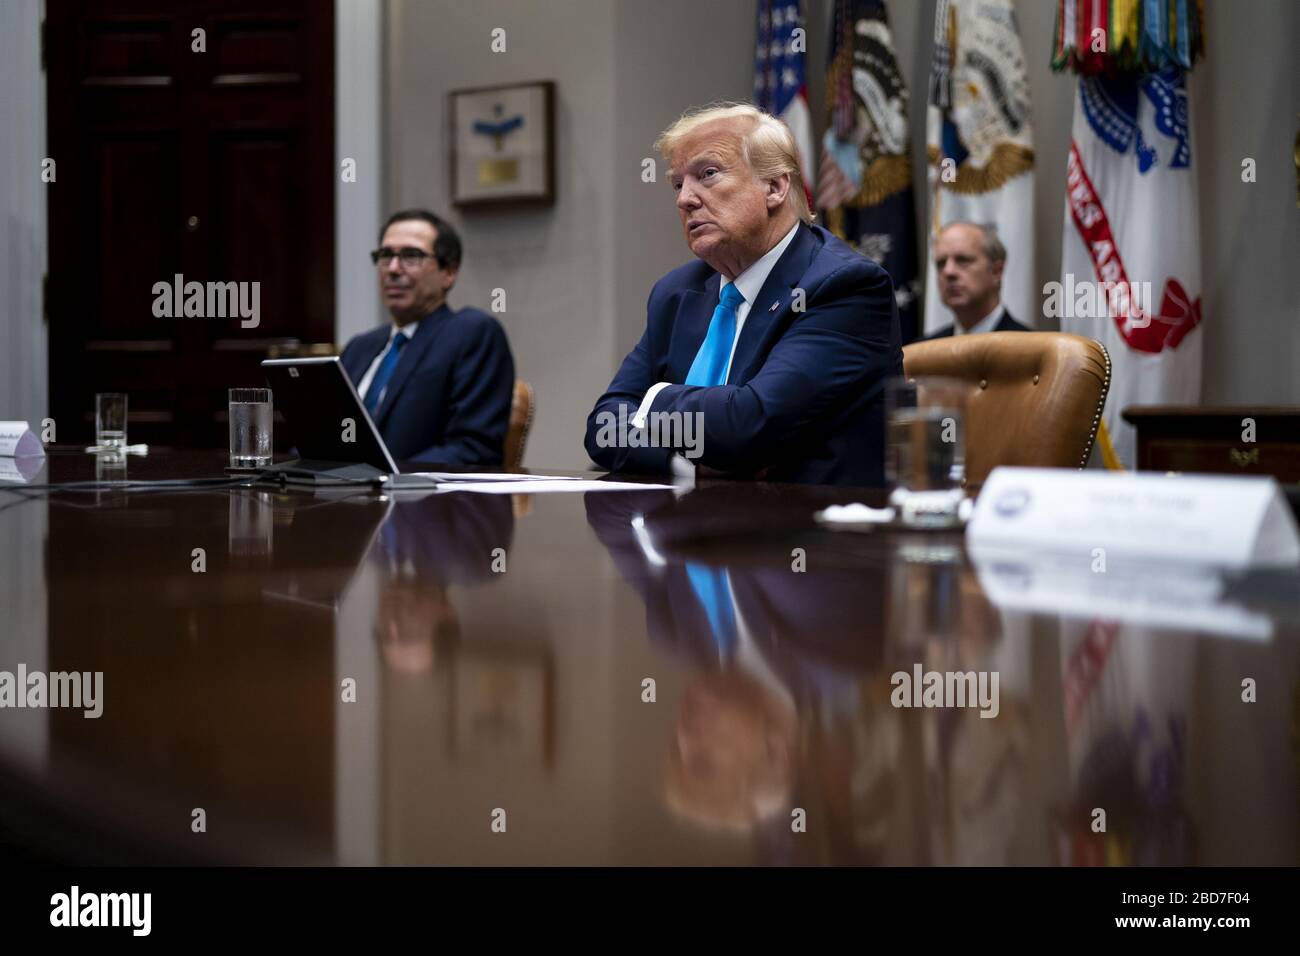 Washington, United States. 07th Apr, 2020. President Donald Trump makes remarks as he participates in a Small Business Relief Update at the White House on Tuesday, April 7, 2020 in Washington, DC President Donald Trump announced in March that companies affected by the coronavirus will be given $50 billion more in low-interest loans federally guaranteed by the Small Business Administration. Photo by Doug Mills/UPI Credit: UPI/Alamy Live News Stock Photo